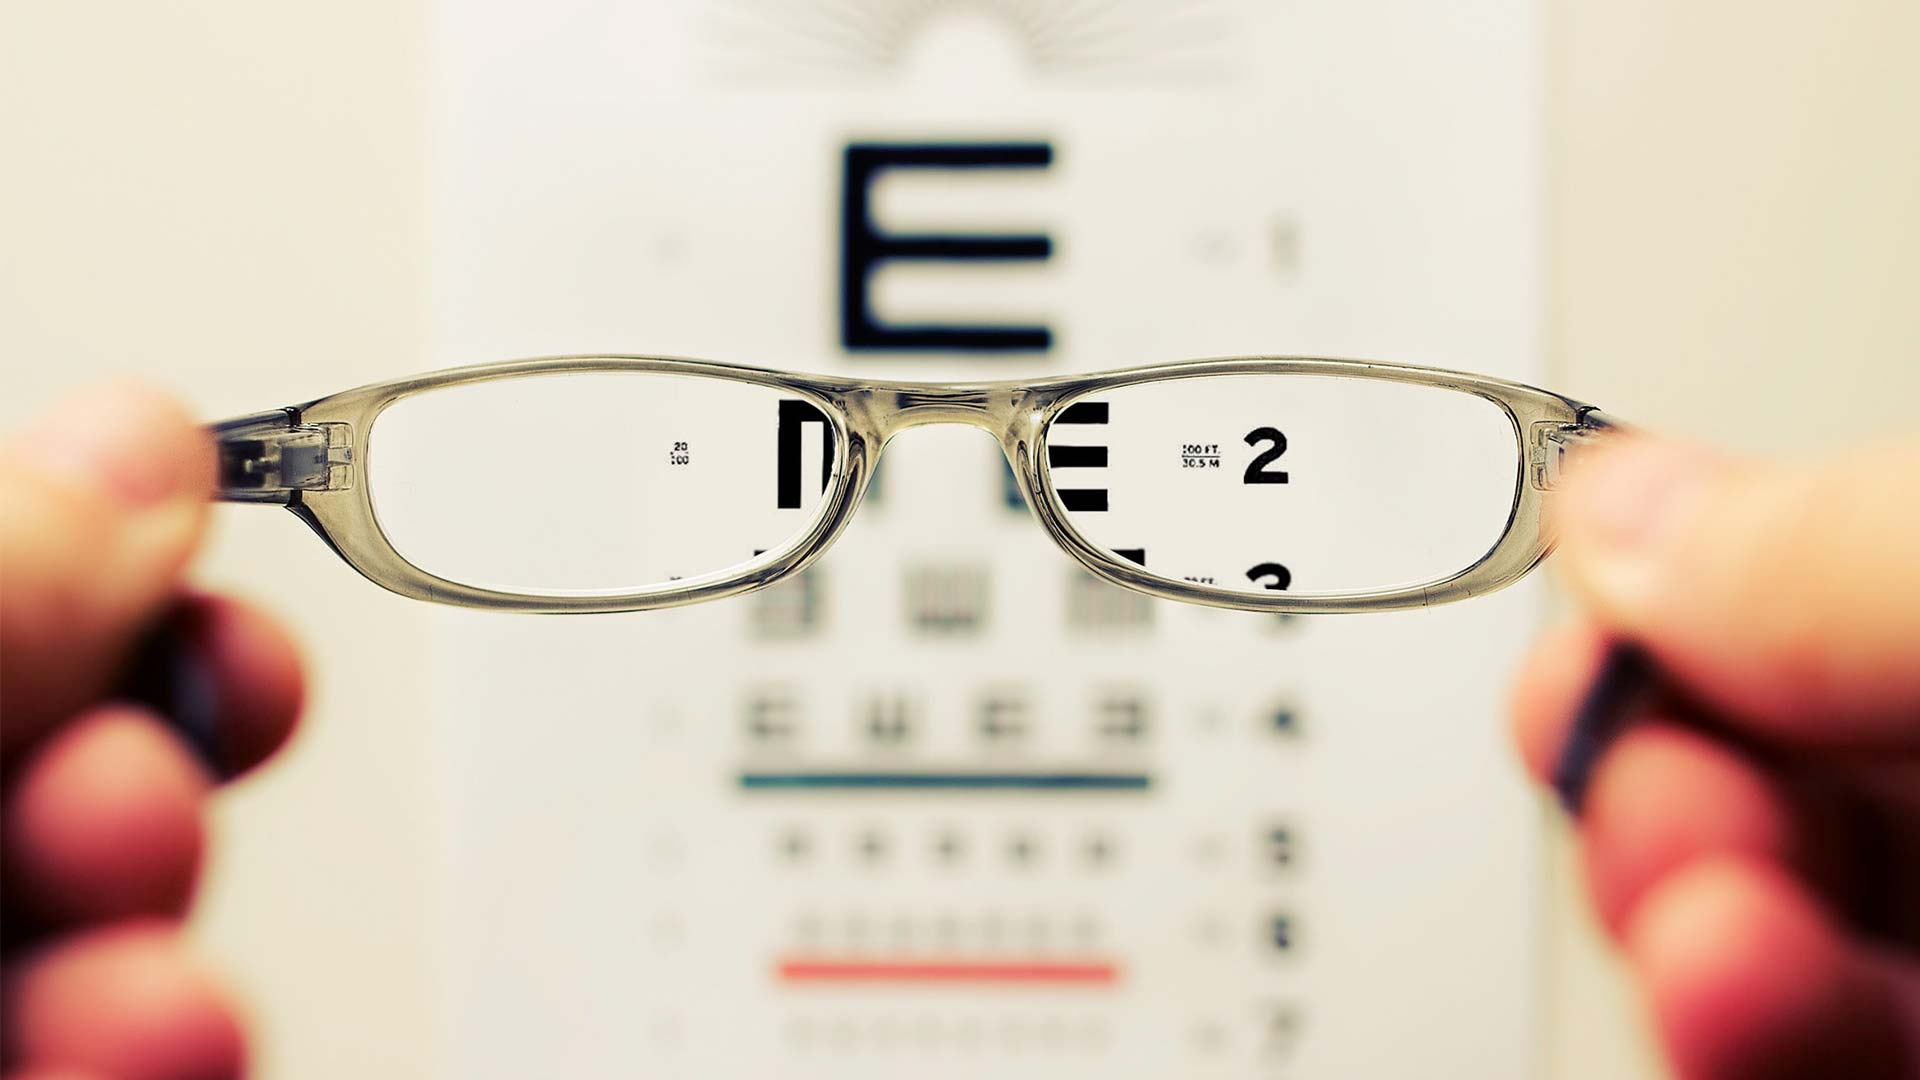 The Snellen Eye Chart & 20/20 Vision - Looking Glass Optical